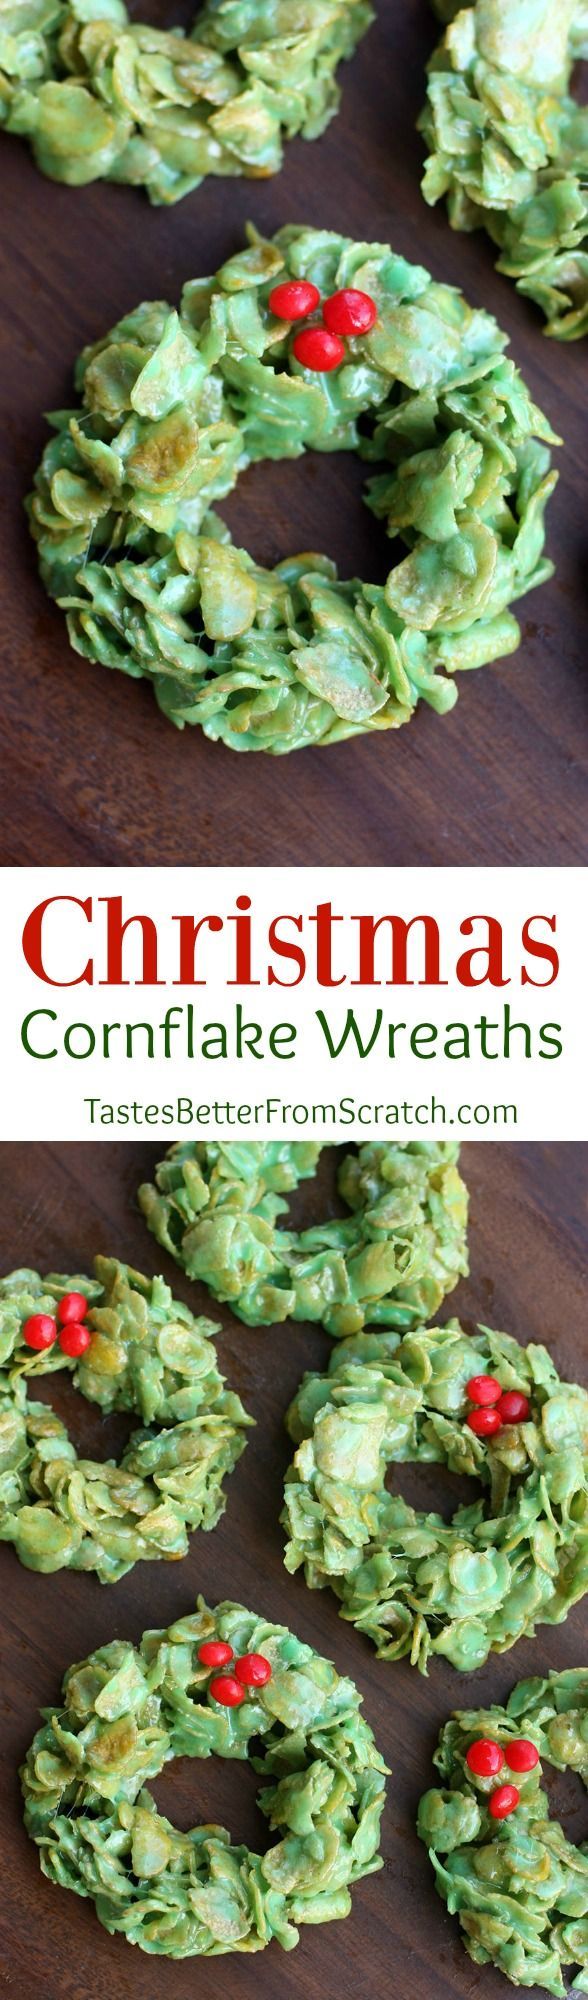 Christmas Cornflake Wreaths are one of my favorite easy Christmas treats! | Tastes